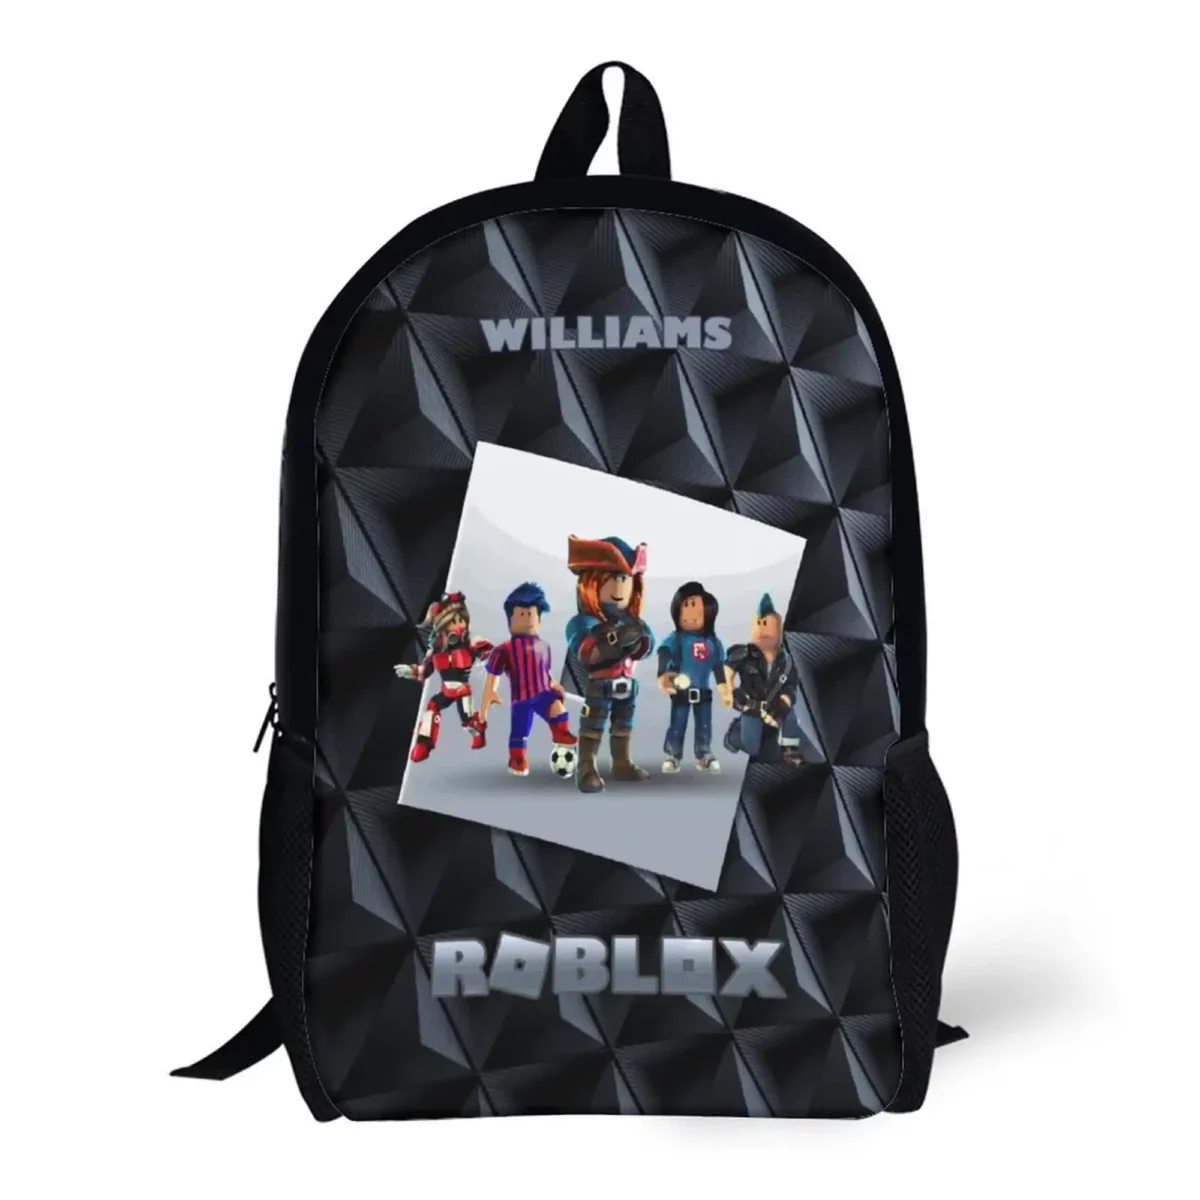 Personalized Black Roblox Backpack – Customizable Gift for Kids Cool Kiddo 18